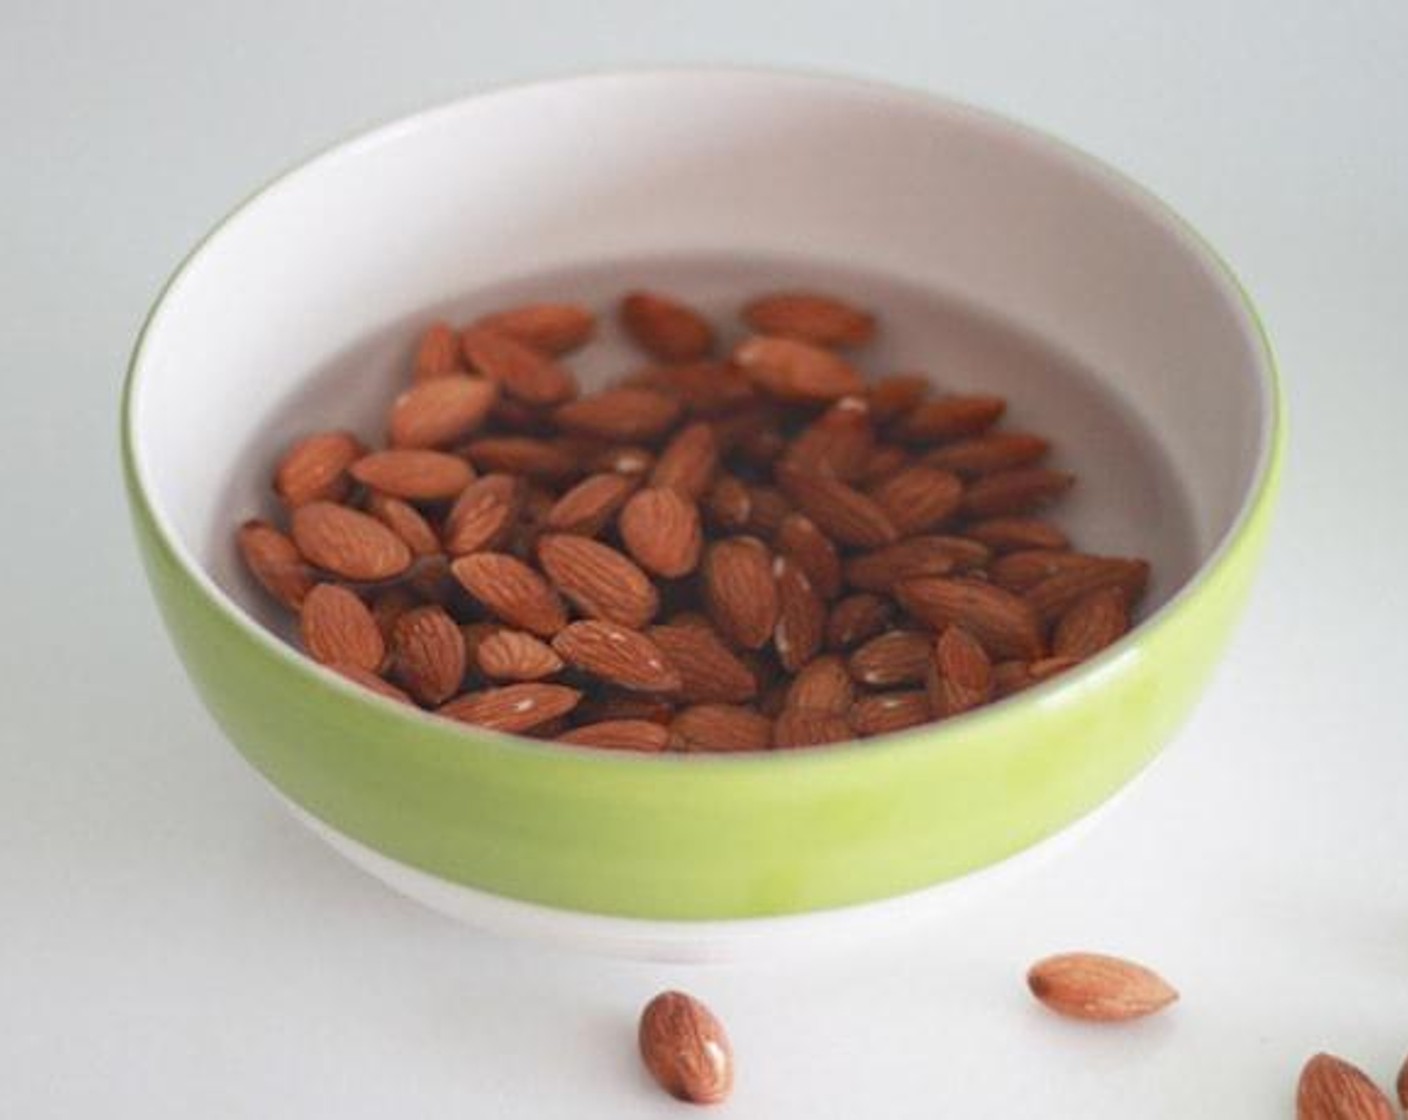 step 1 Place the Raw Almonds (1 cup) in a bowl and cover with water. It's preferred to soak them overnight for 8-12 hours in the water.